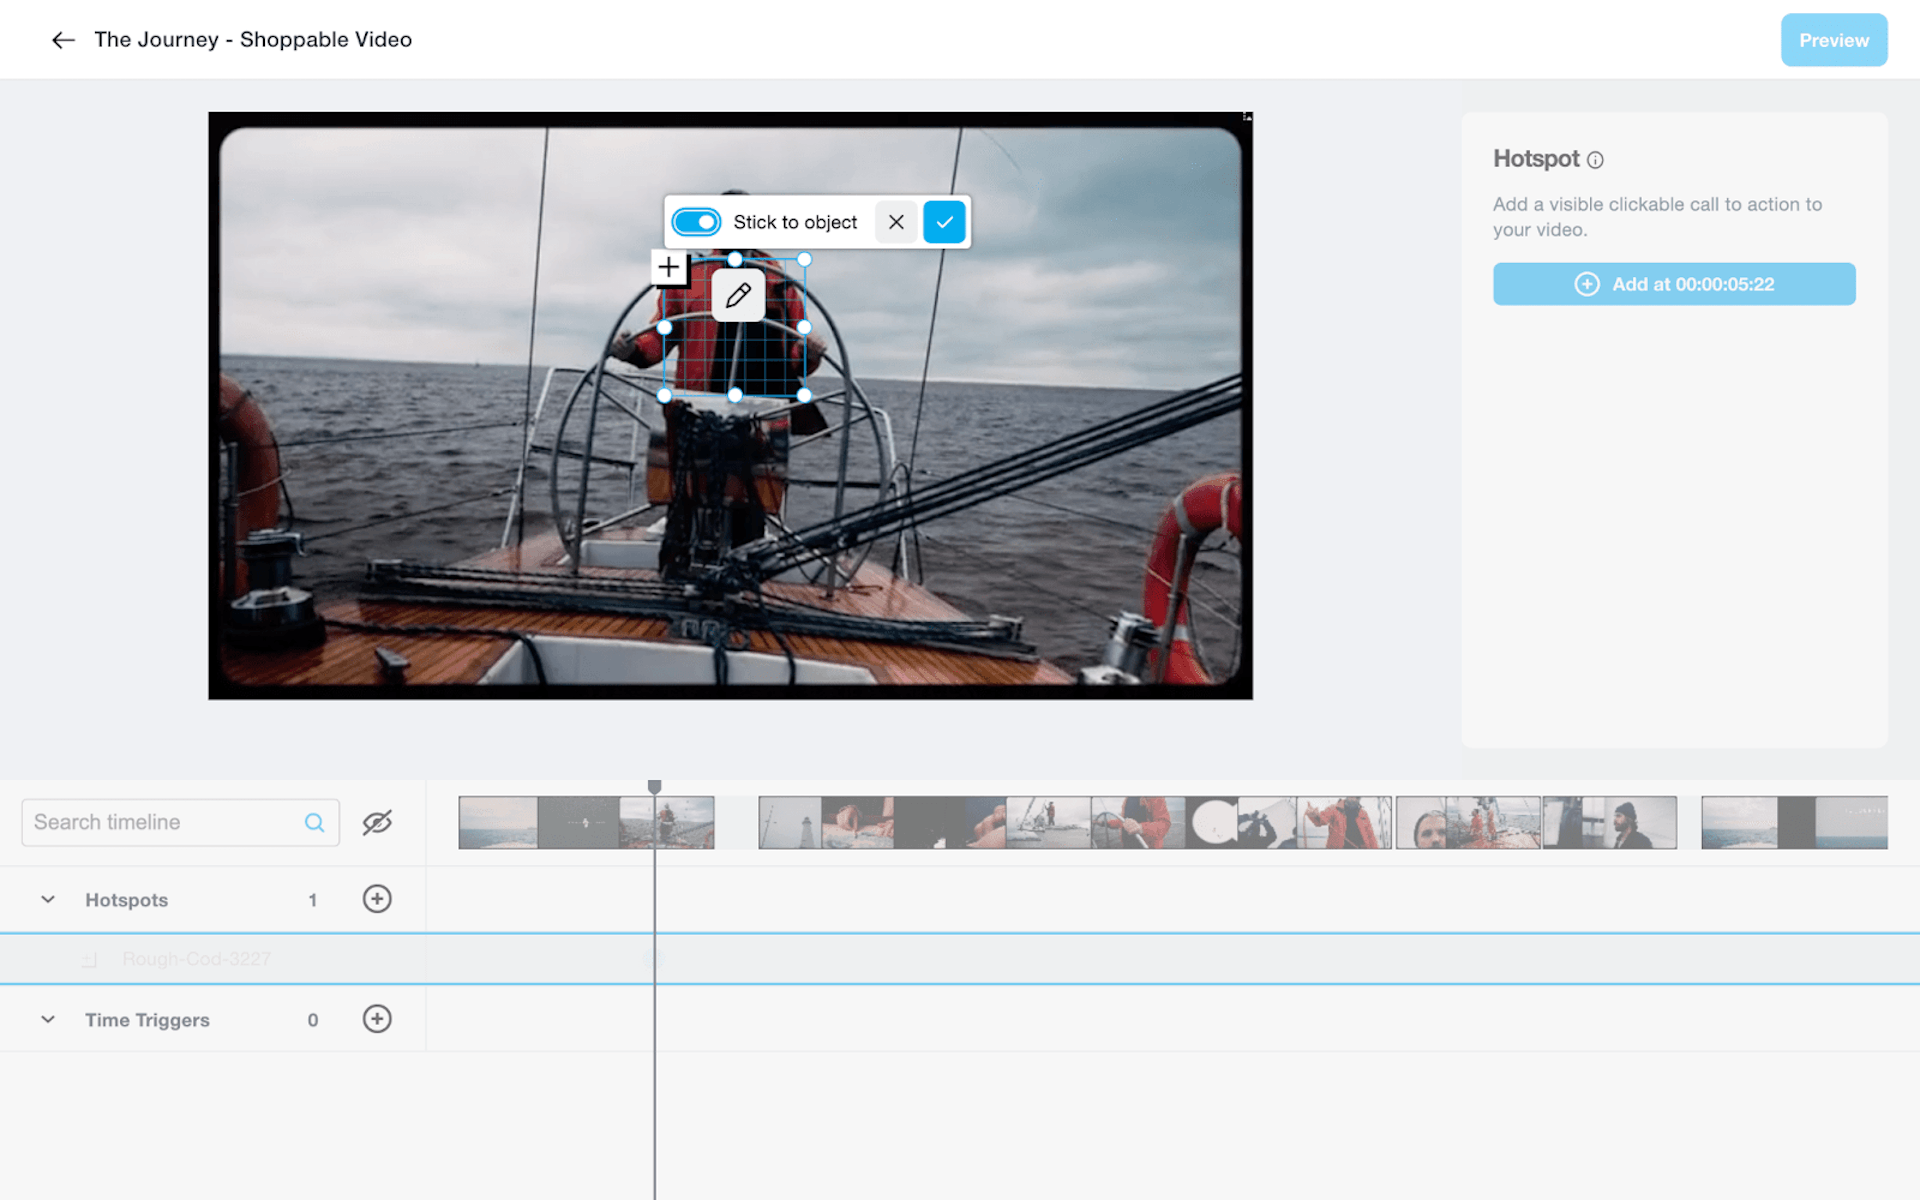 Vimeo Interactive example of how to create video hotspots